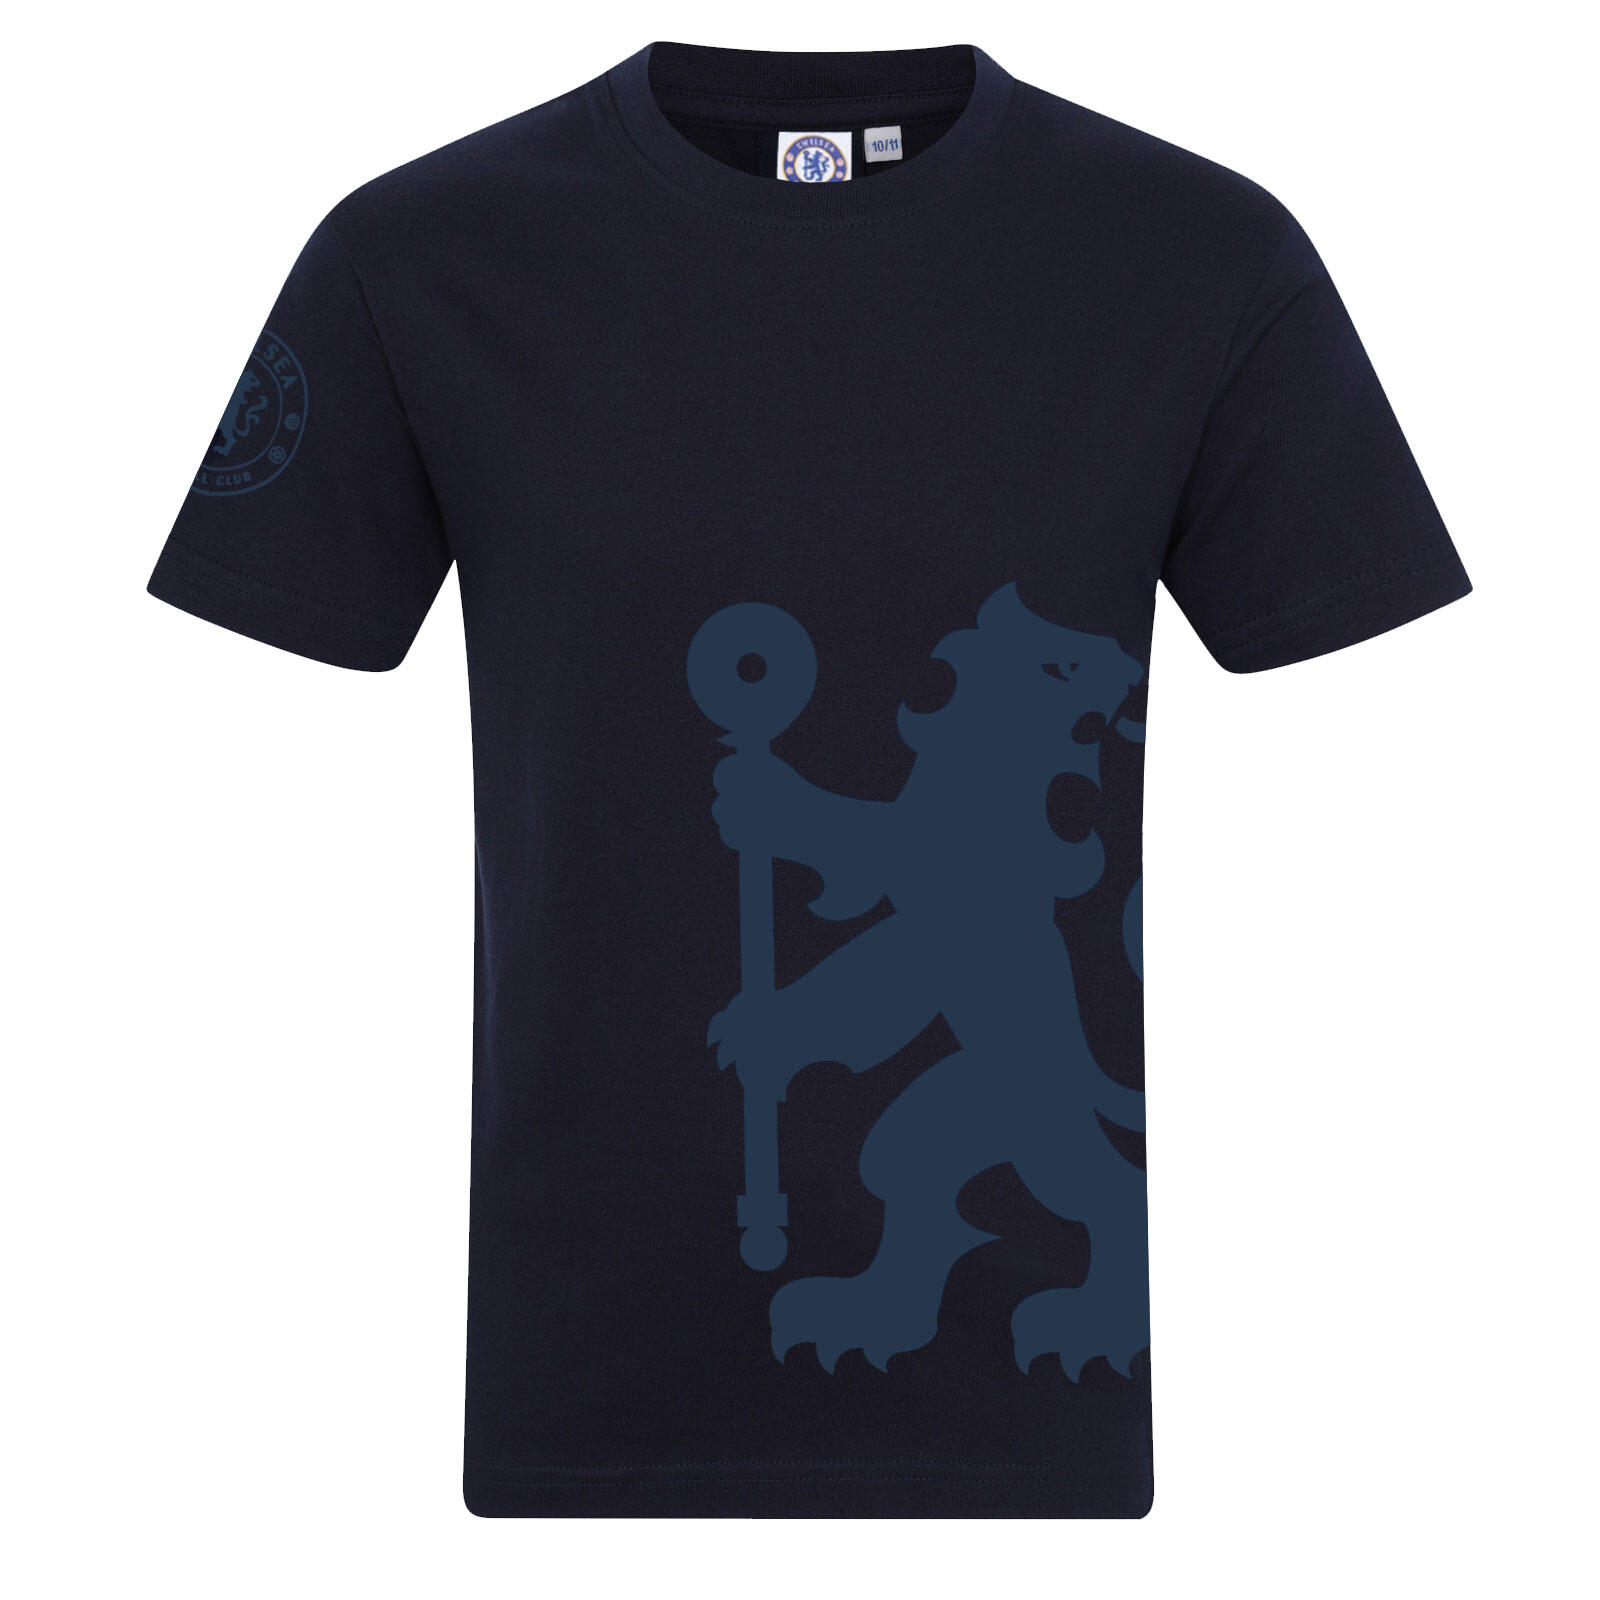 Chelsea FC Boys T-Shirt Graphic Kids OFFICIAL Football Gift 1/3